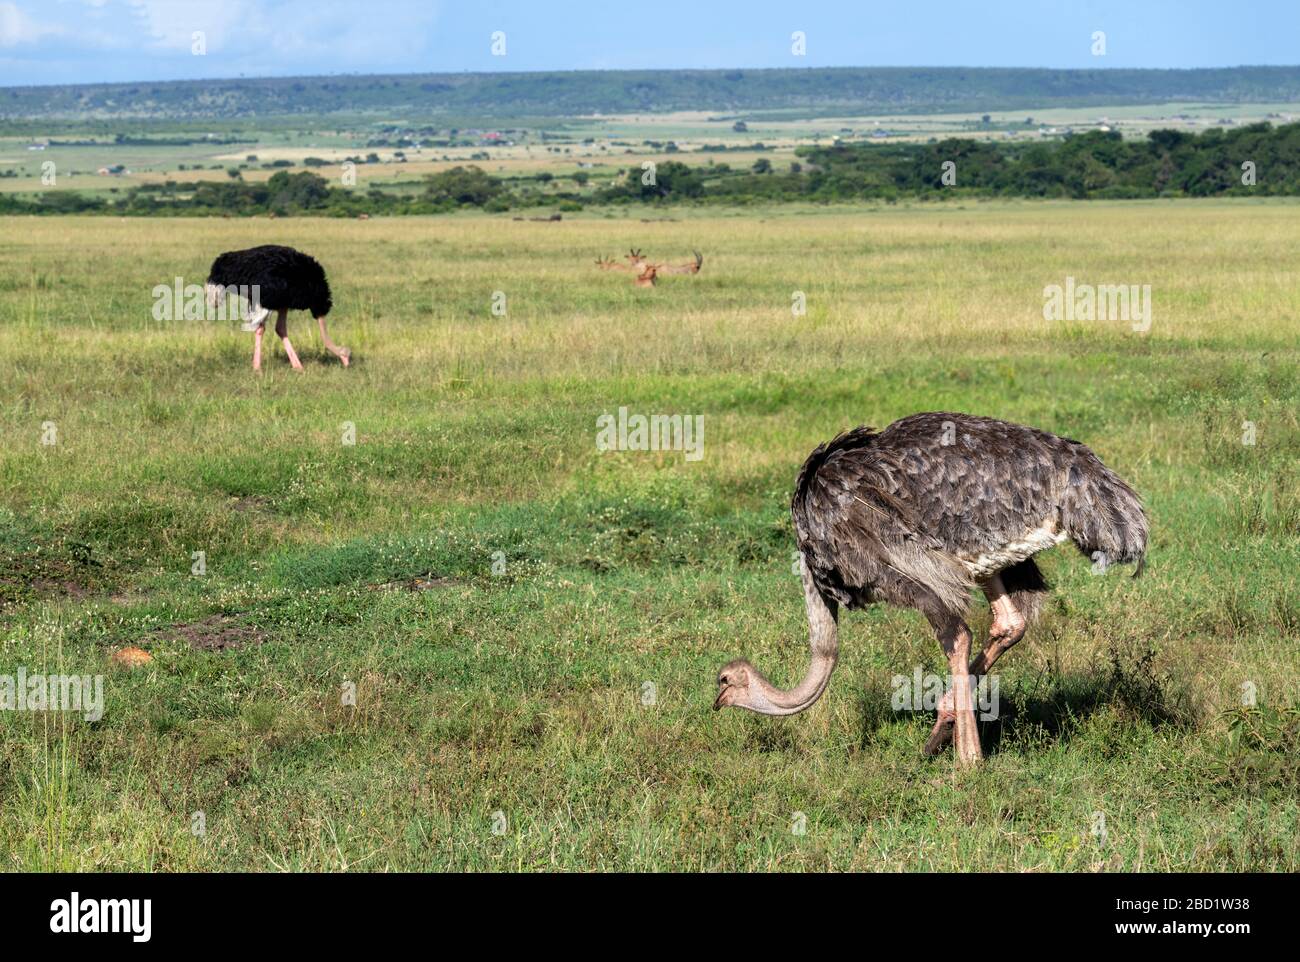 Common Ostrich (Struthio camelus). Female ostrich with a male in the background, Masai Mara National Reserve, Kenya, East Africa Stock Photo